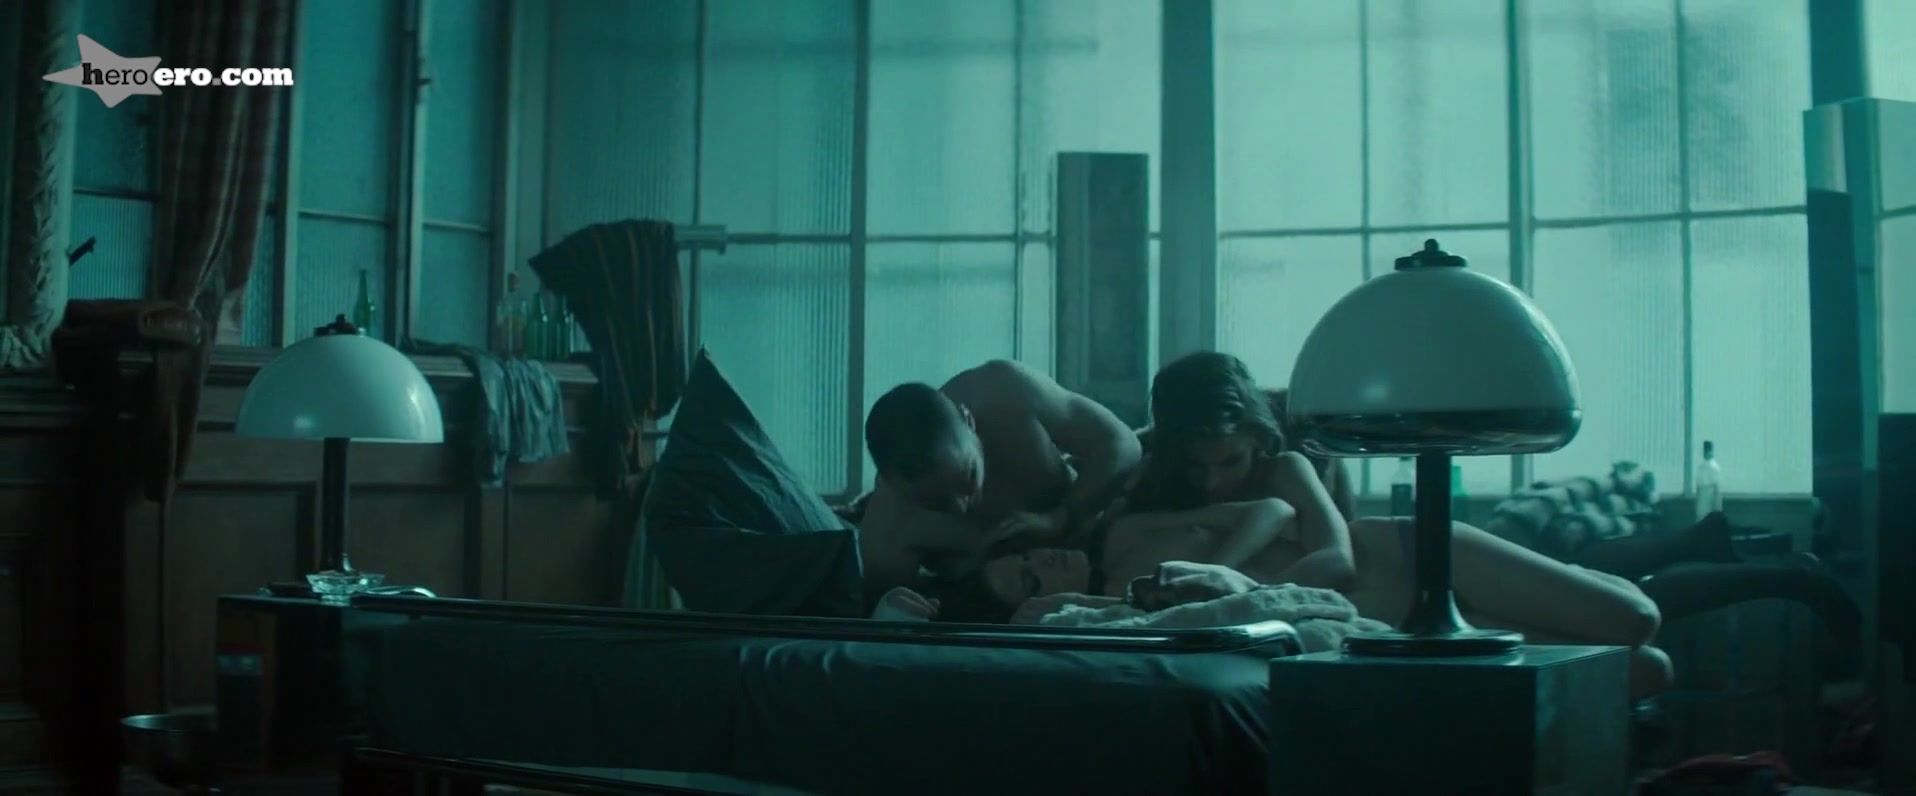 Nudity Charlize Theron, Sofia Boutella Nude - Atomic Blonde (US 2017) Special Locations